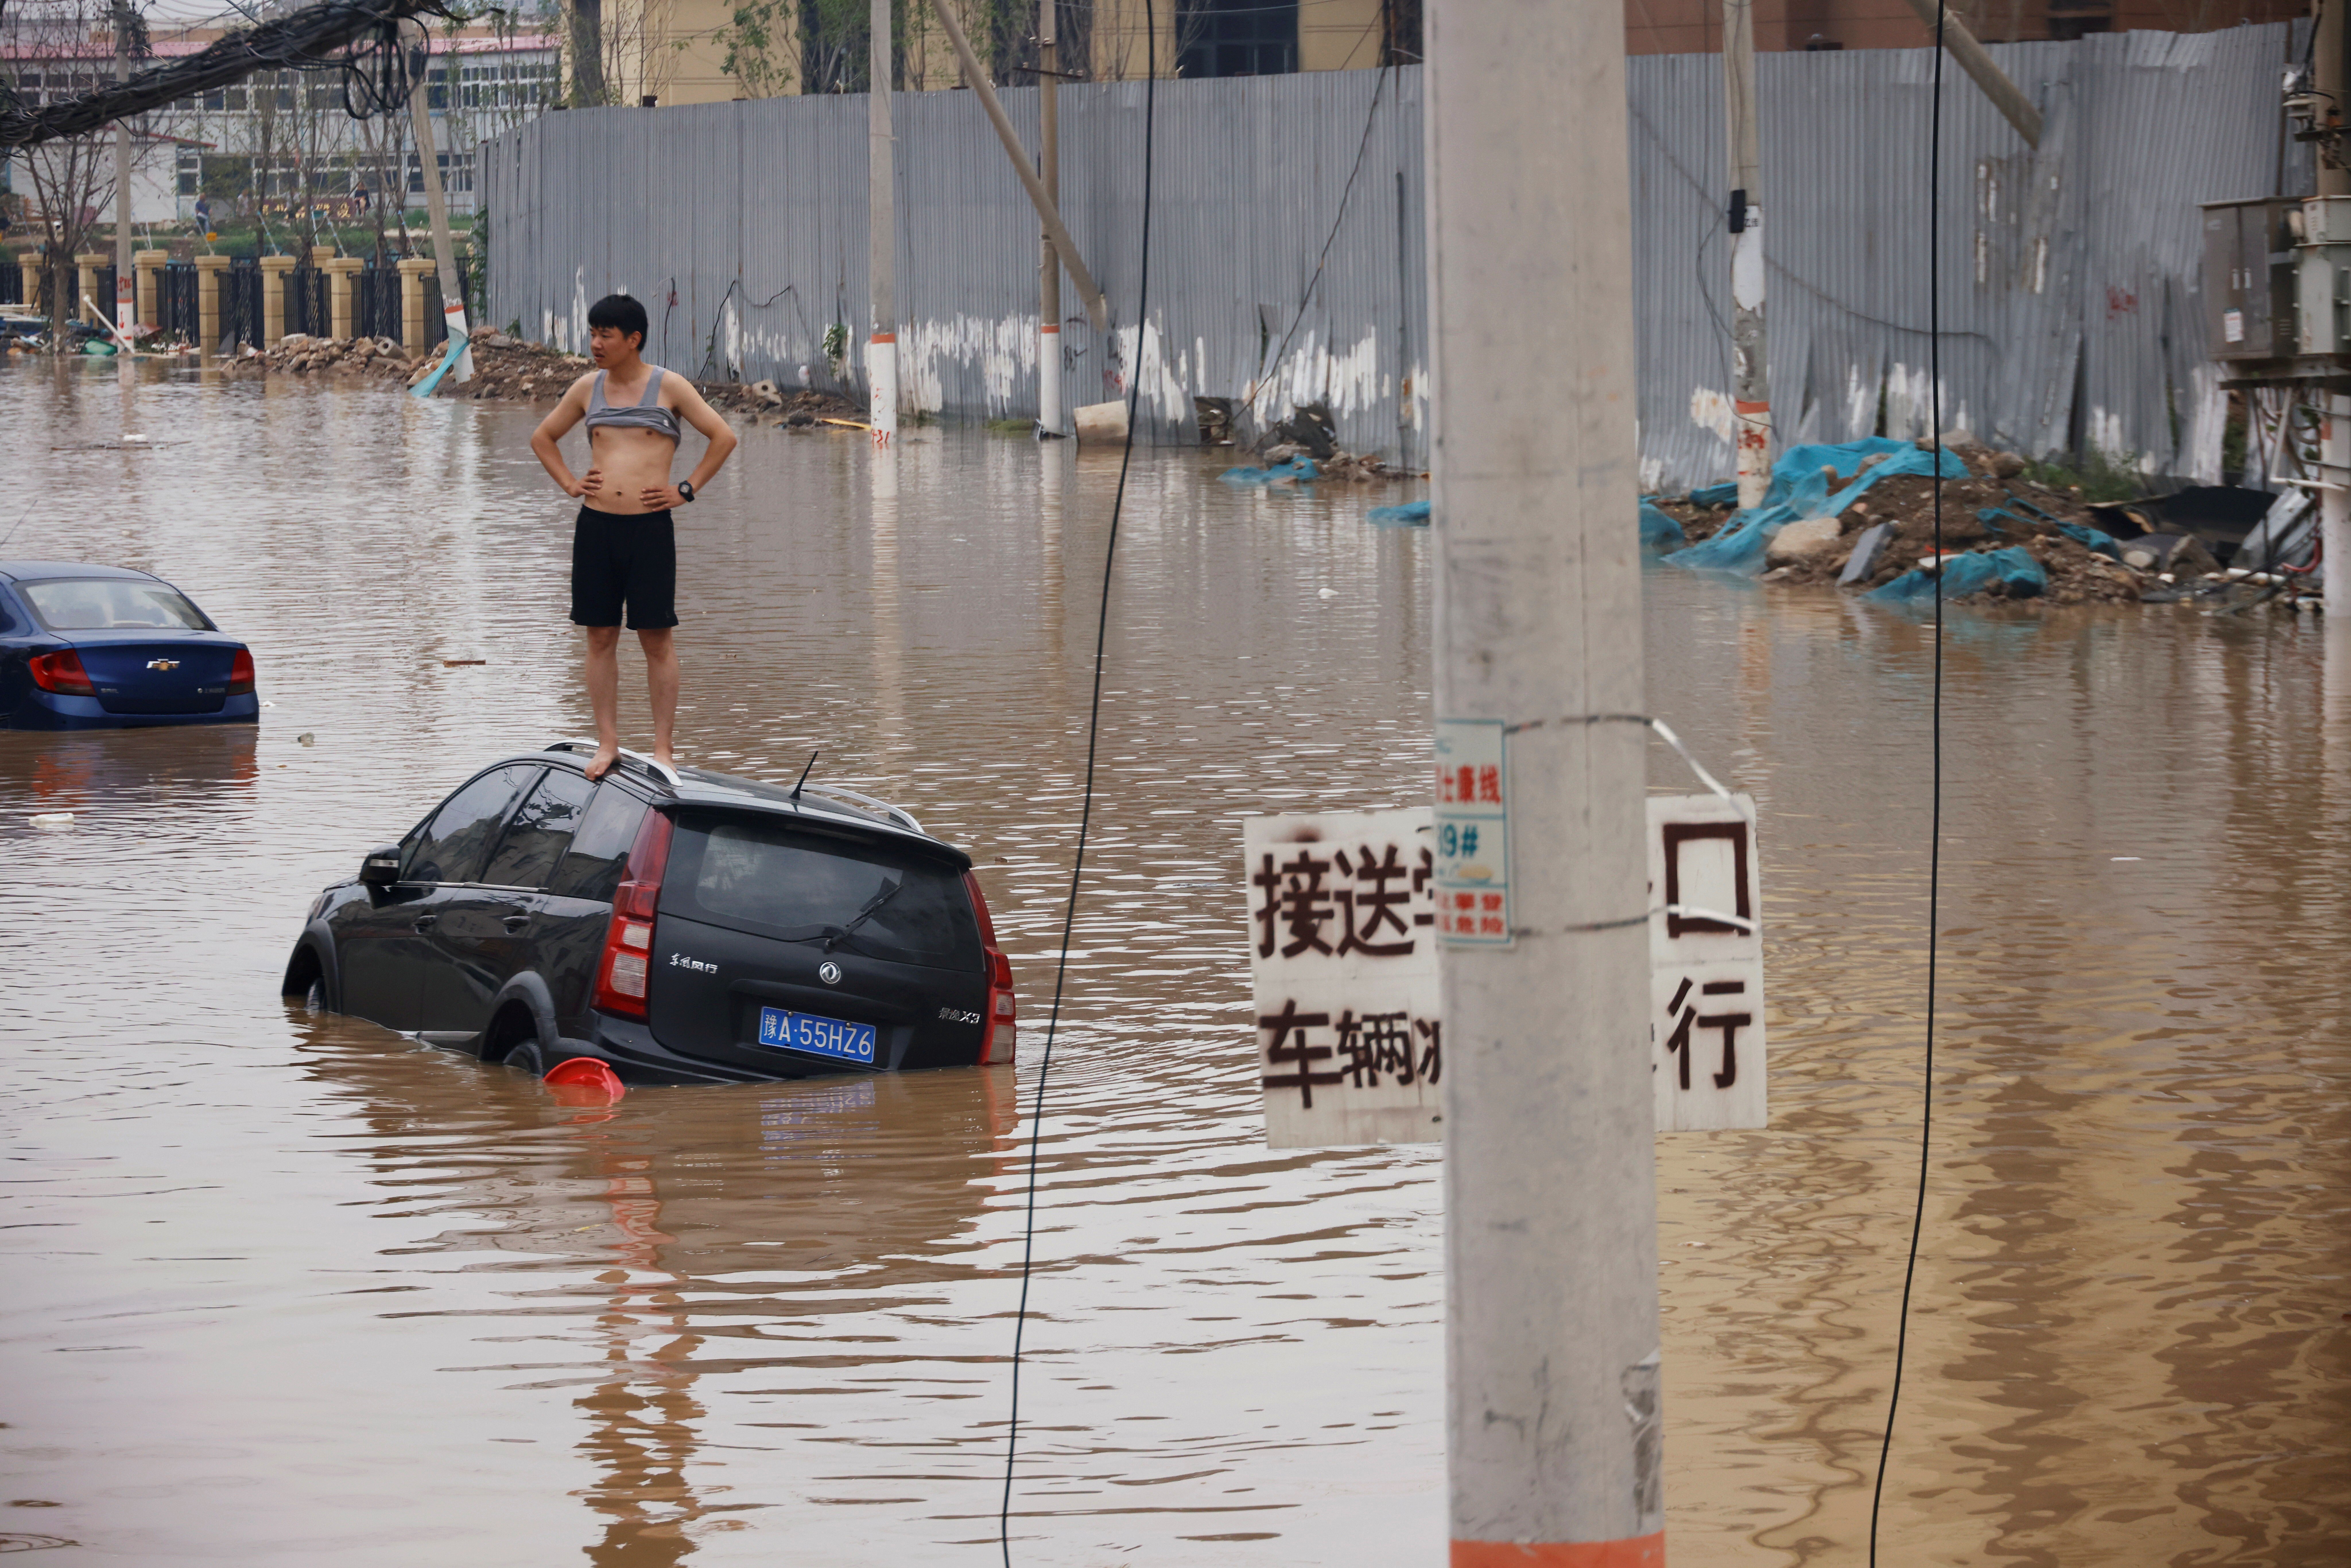 A man stands on a stranded vehicle on a flooded road following heavy rainfall in Zhengzhou, Henan province, China July 22, 2021. Photo: Reuters